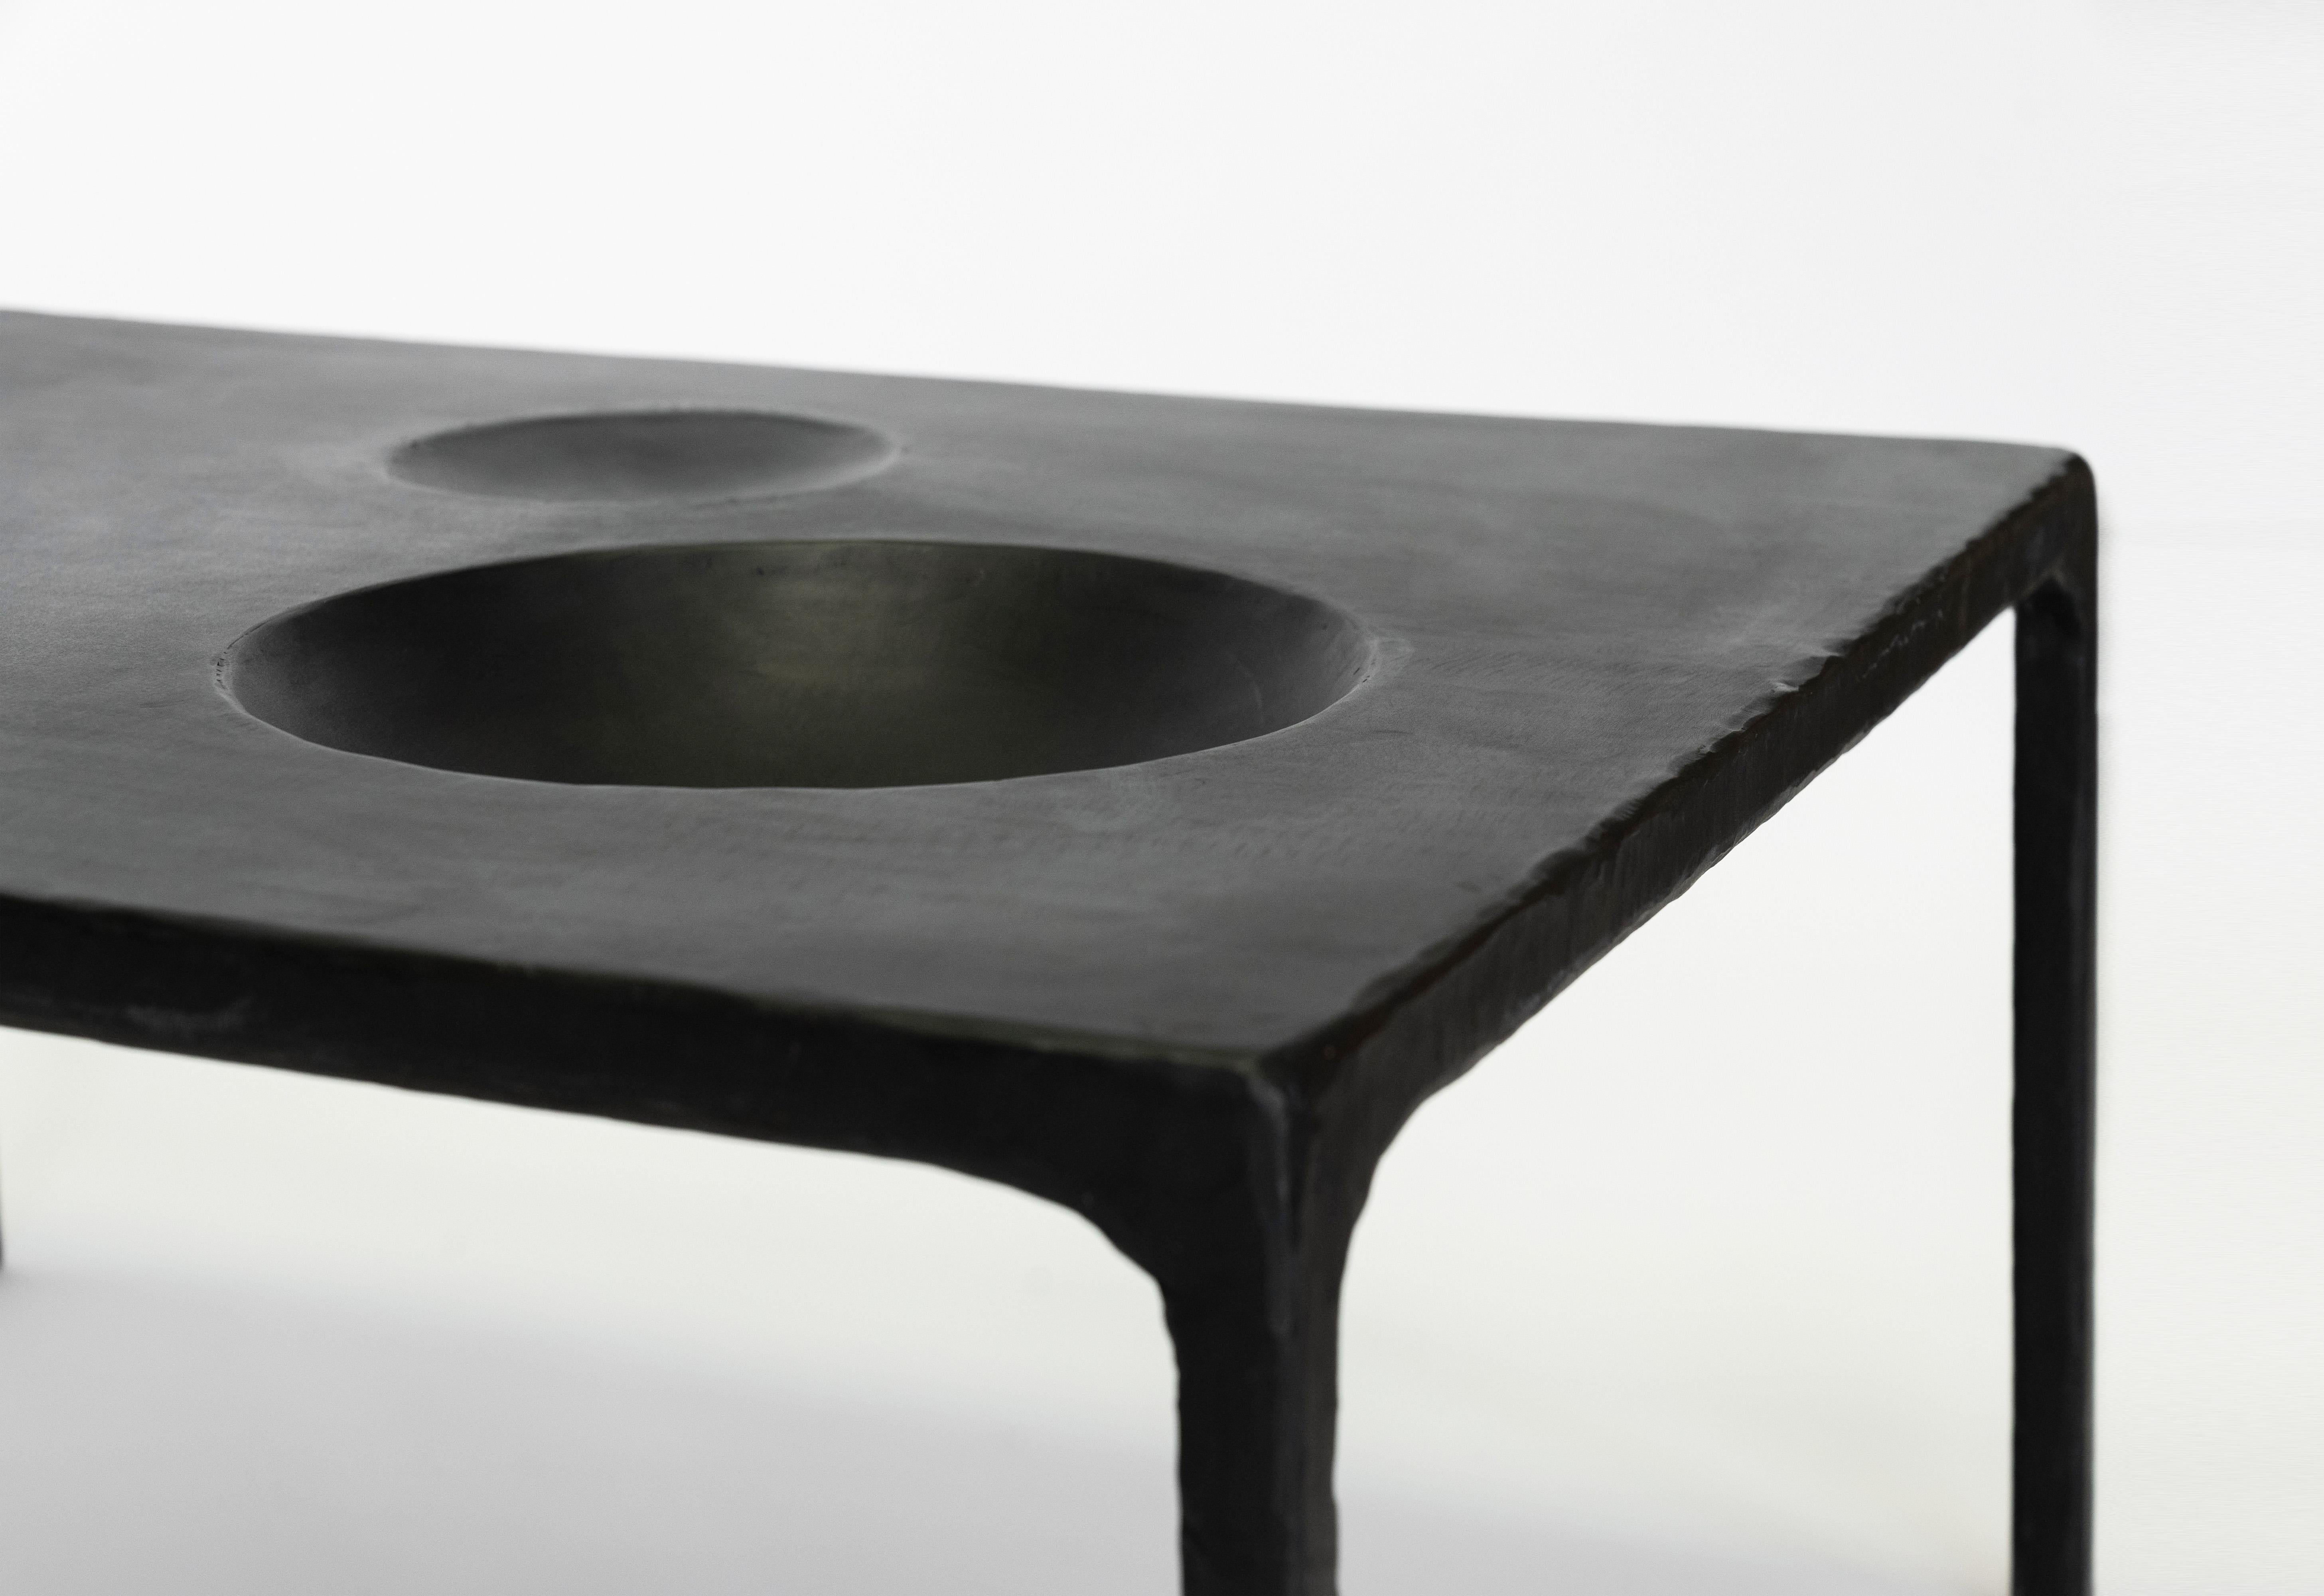 Carved Side/End Table Geometric Negative Space Voids Modern Blackened/Waxed Steel